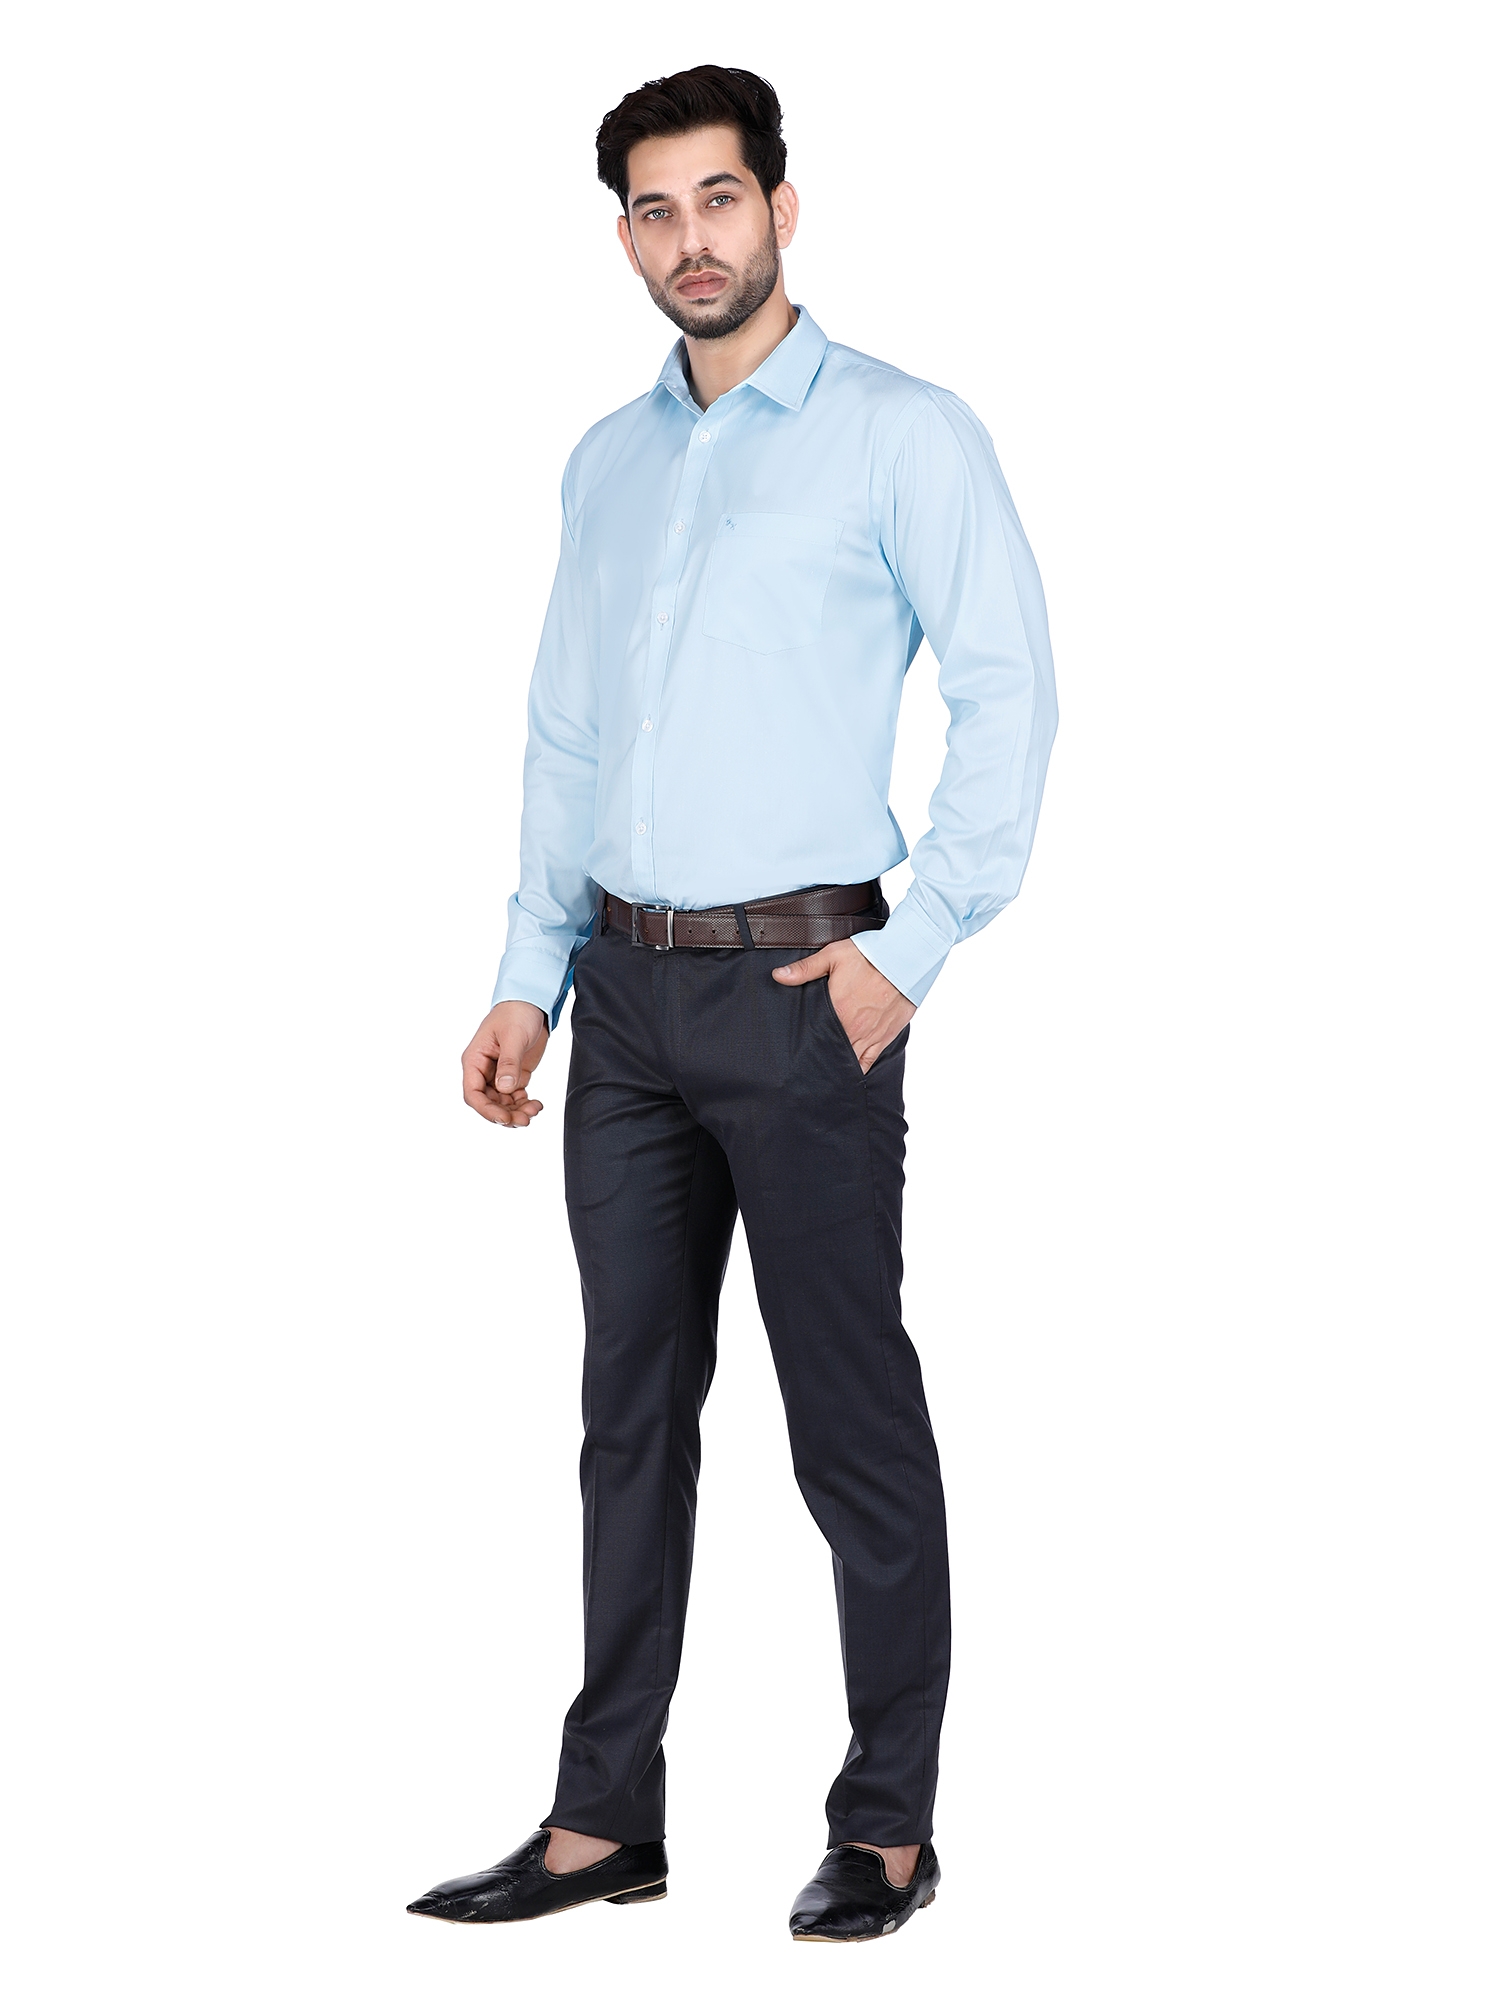 D'cot by Donear Men Blue Polycotton Slim Solid Formal Shirts